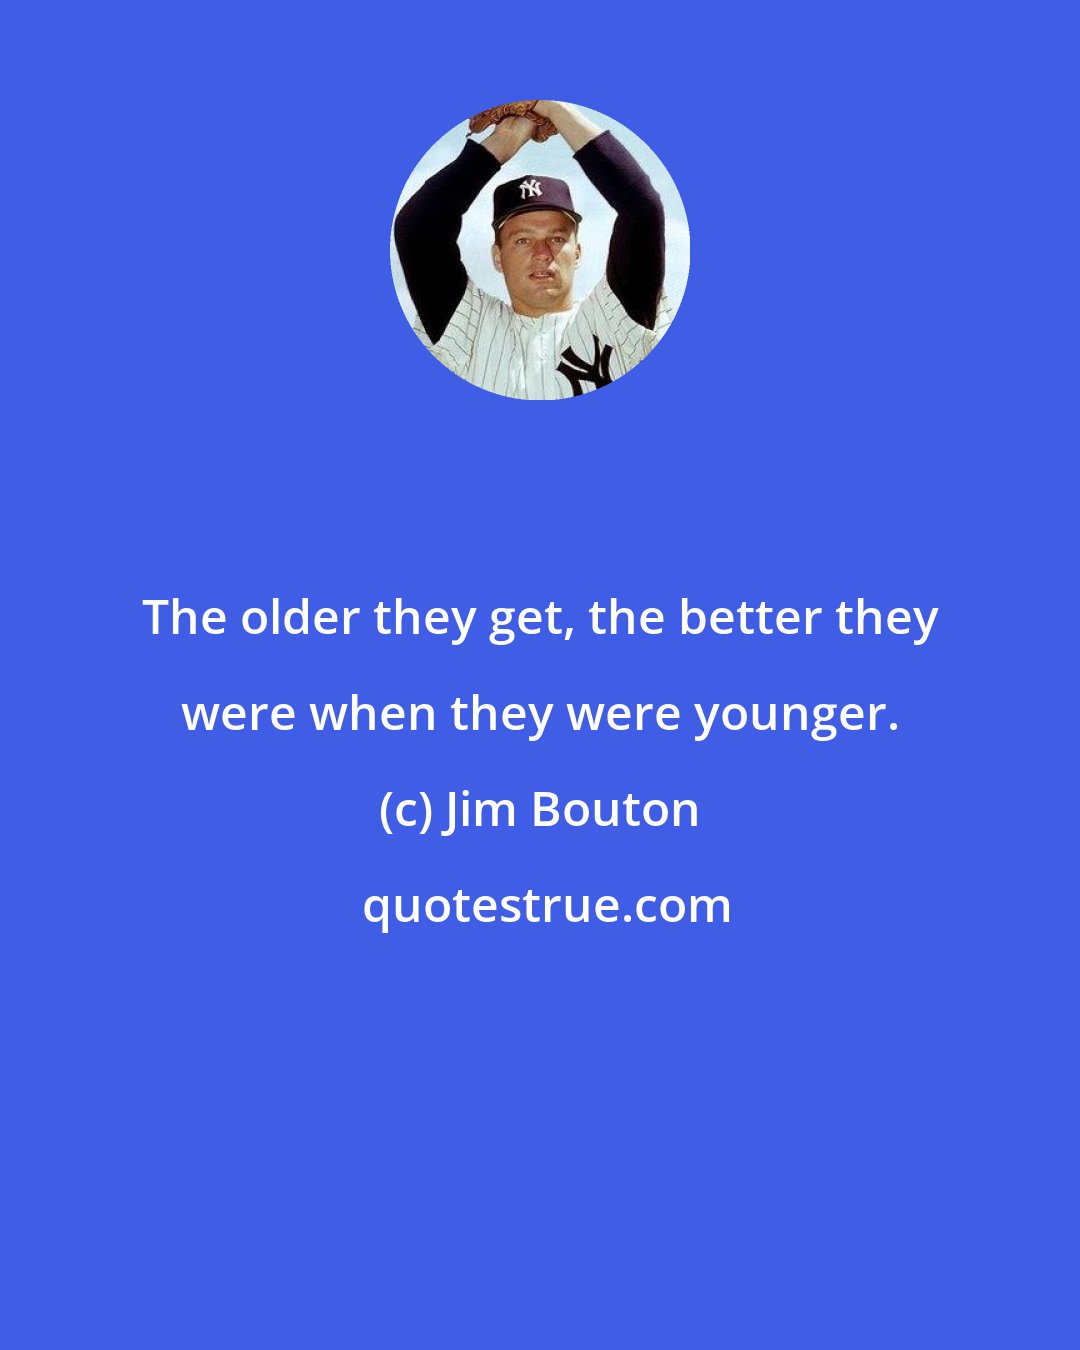 Jim Bouton: The older they get, the better they were when they were younger.